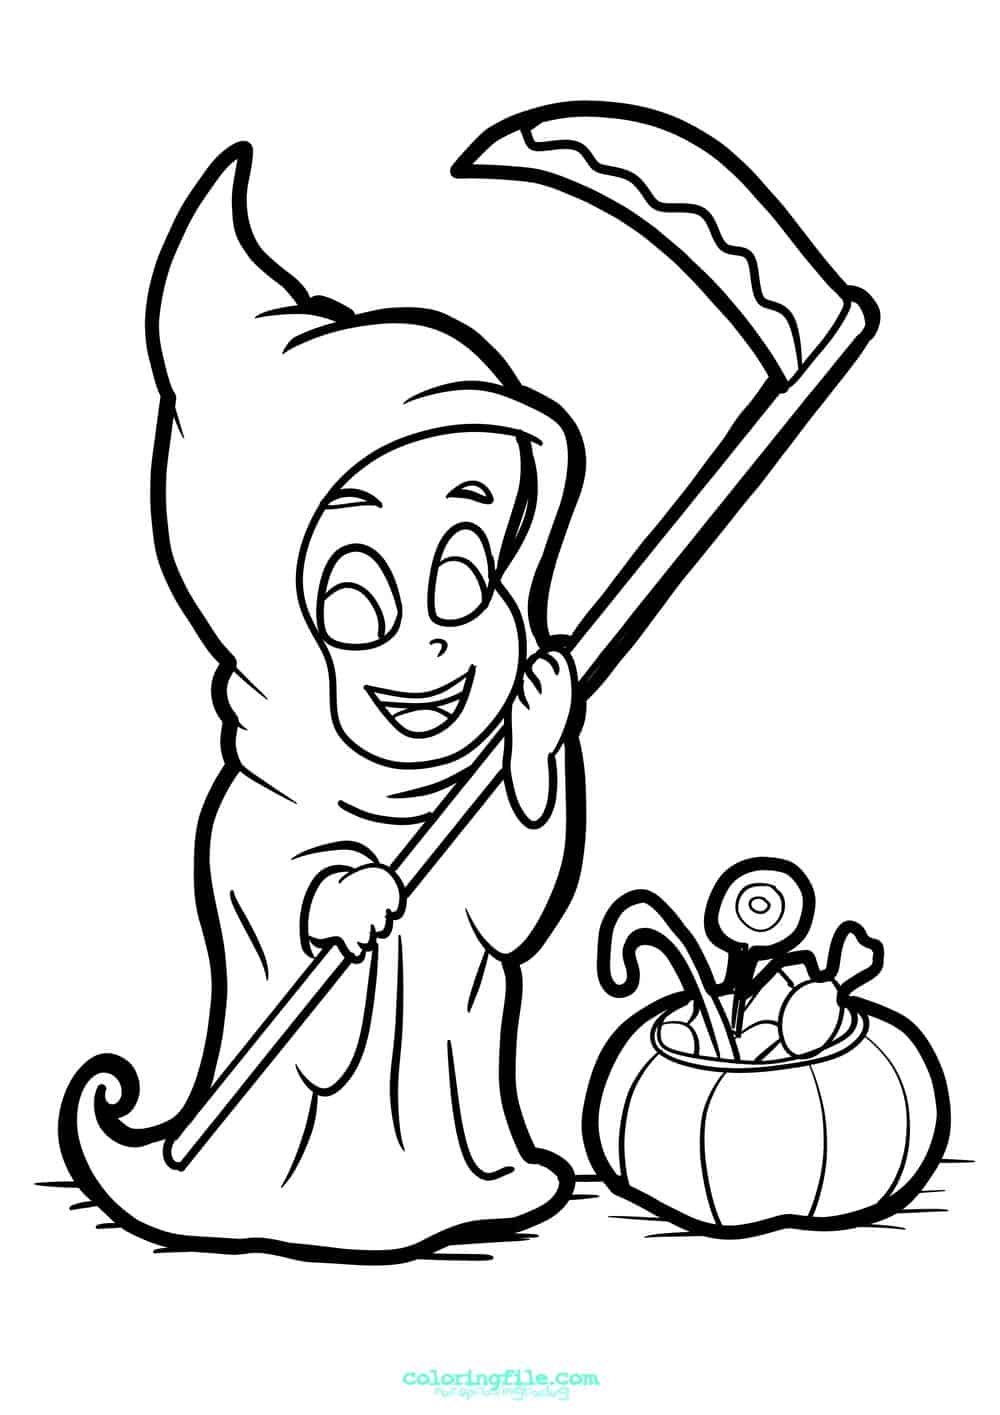 Halloween coloring pages for kid